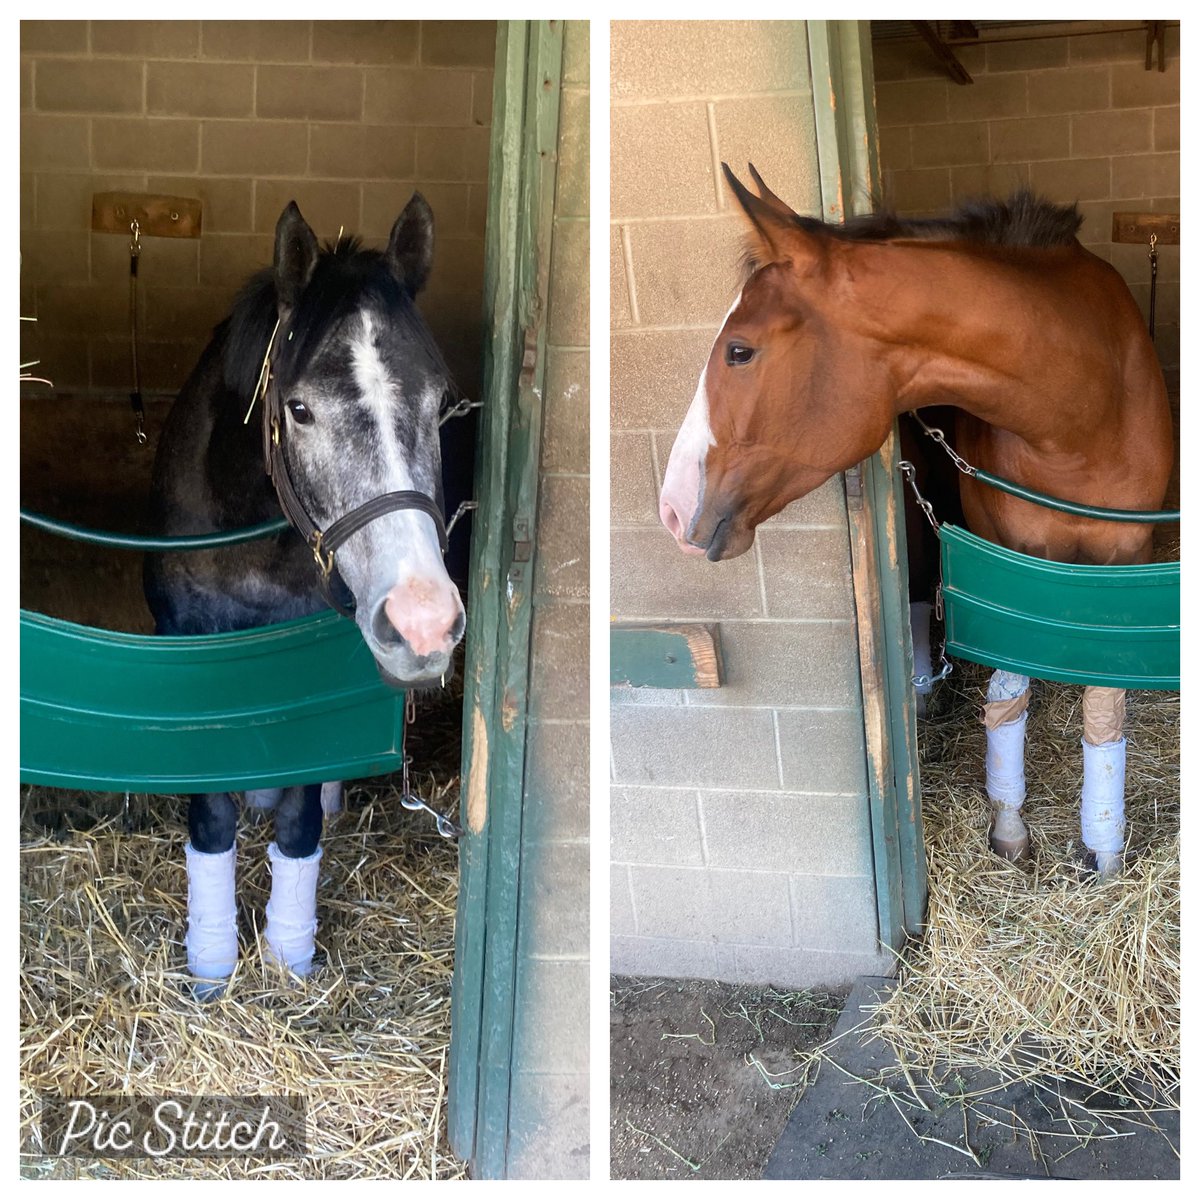 Nice weekend for maiden winners @OaklawnRacing 
HAULIN ICE for J+J Thoroughbreds and @NikJuarez 
IDALOU for Choctaw Racing Stable and @ChrisLanderos01 
Excited for their futures! 🐎🎉